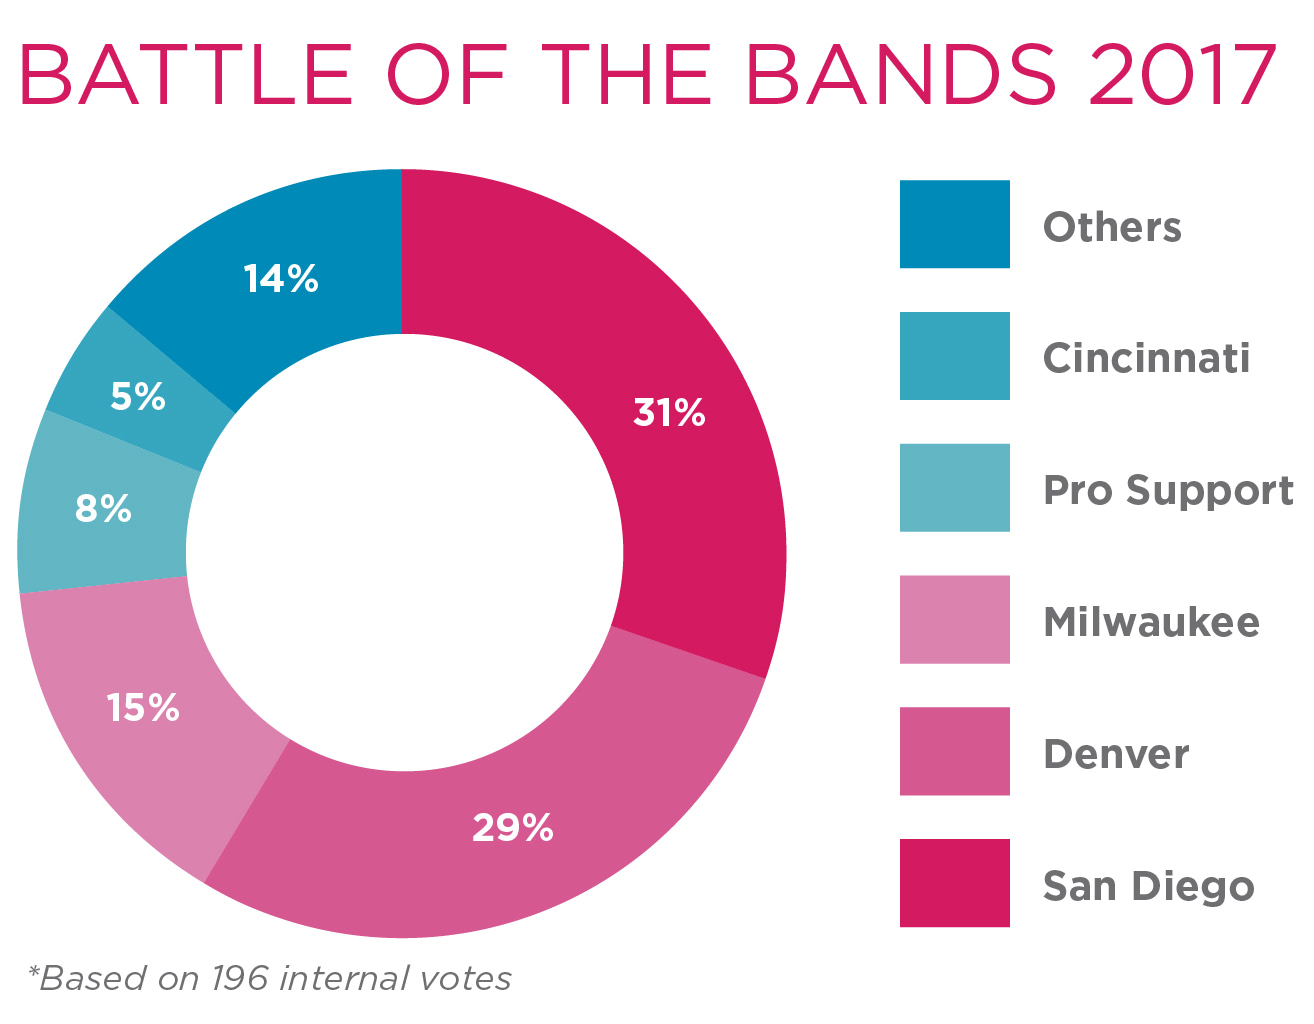 AVI Systems Battle of the Bands 2017 leaderboard shows that San Diego came out on top as this year's winner, garnering 31 percent of the vote.